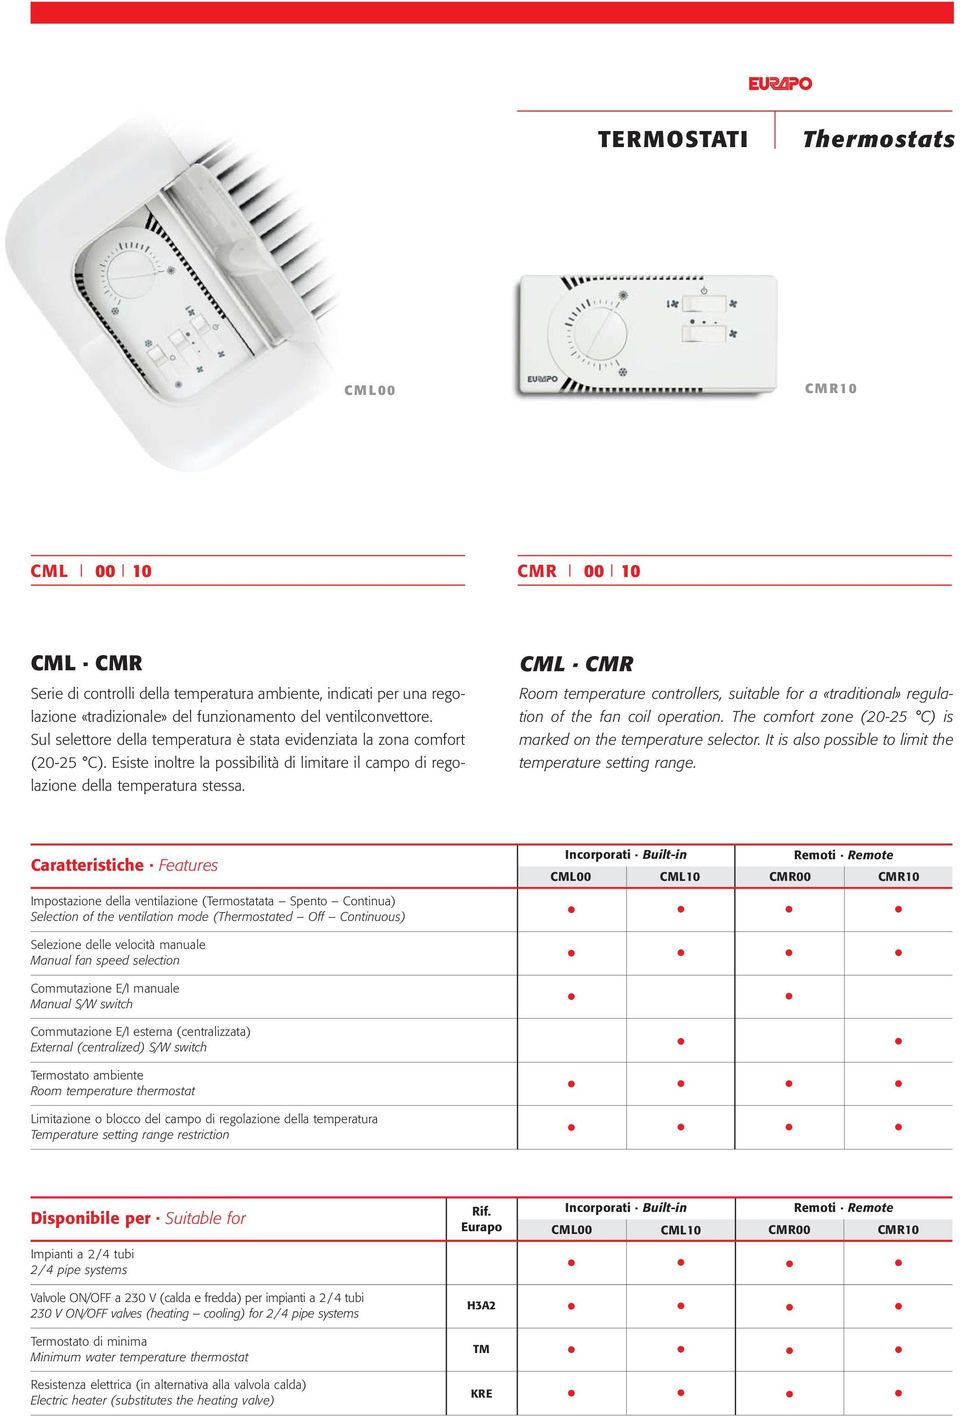 CML CMR Room temperature controllers, suitable for a «traditional» regulation of the fan coil operation. The comfort zone (20-25 C) is marked on the temperature selector.